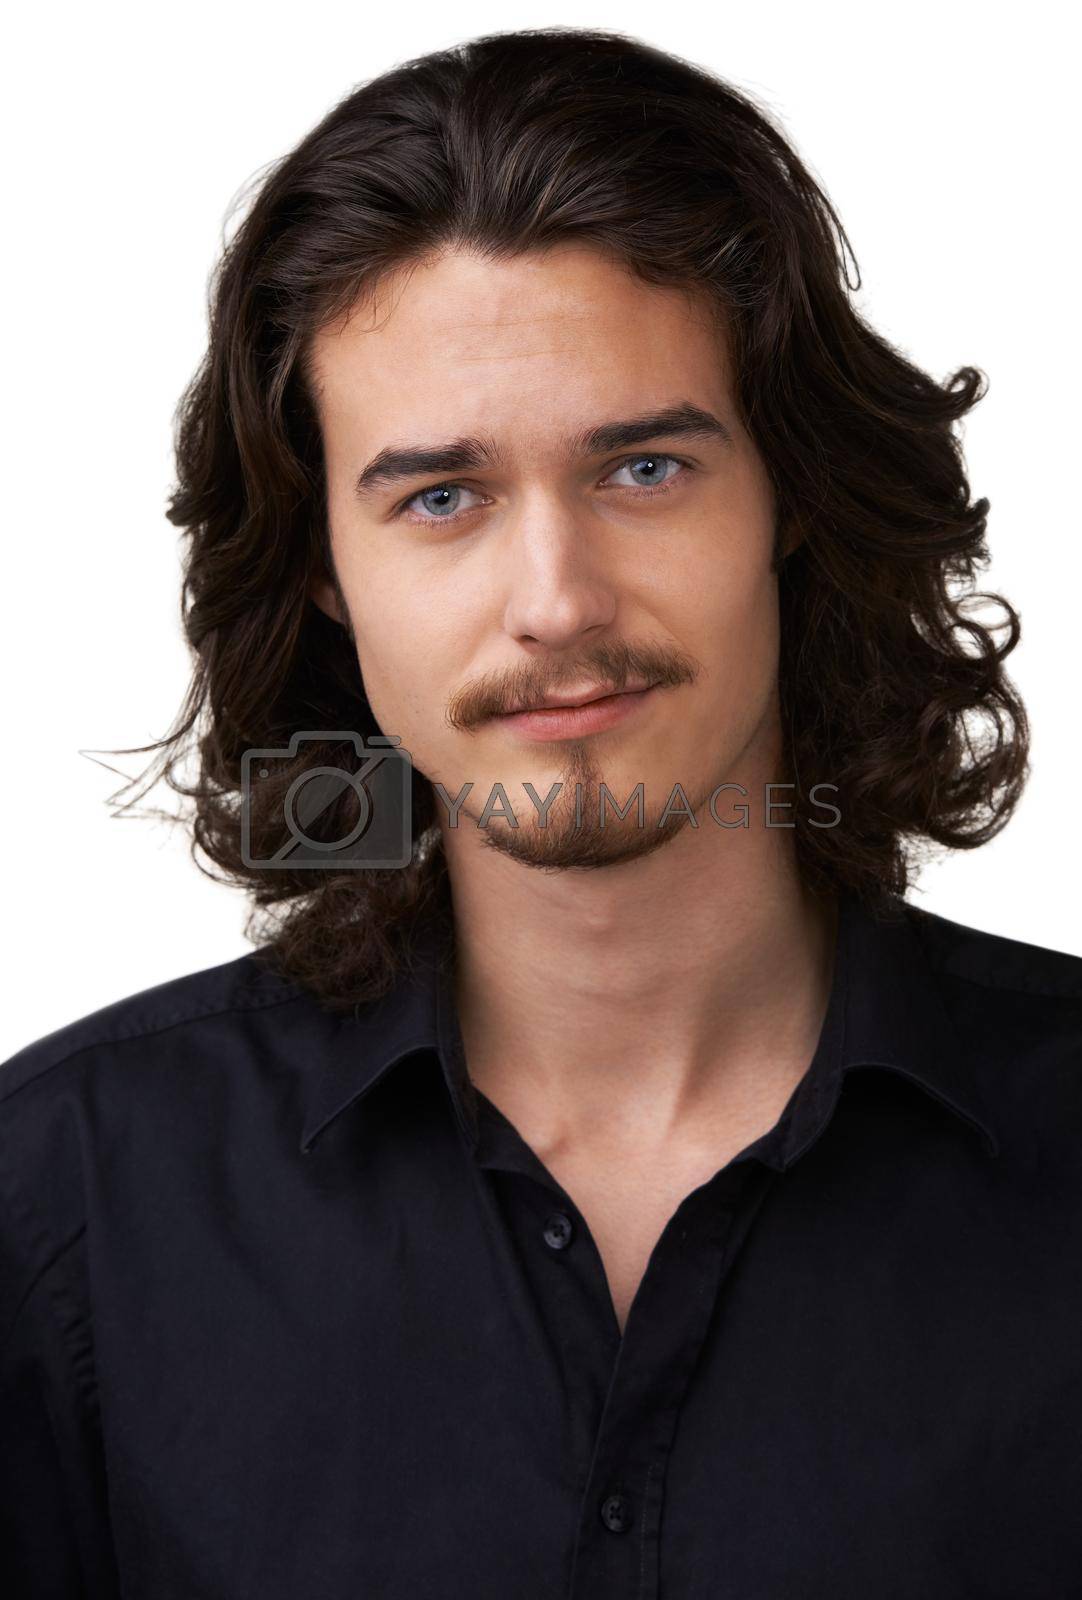 Royalty free image of Giving you that dreamy smile. Handsome young man with shoulder-length hair and a goatee smiling at the camera. by YuriArcurs